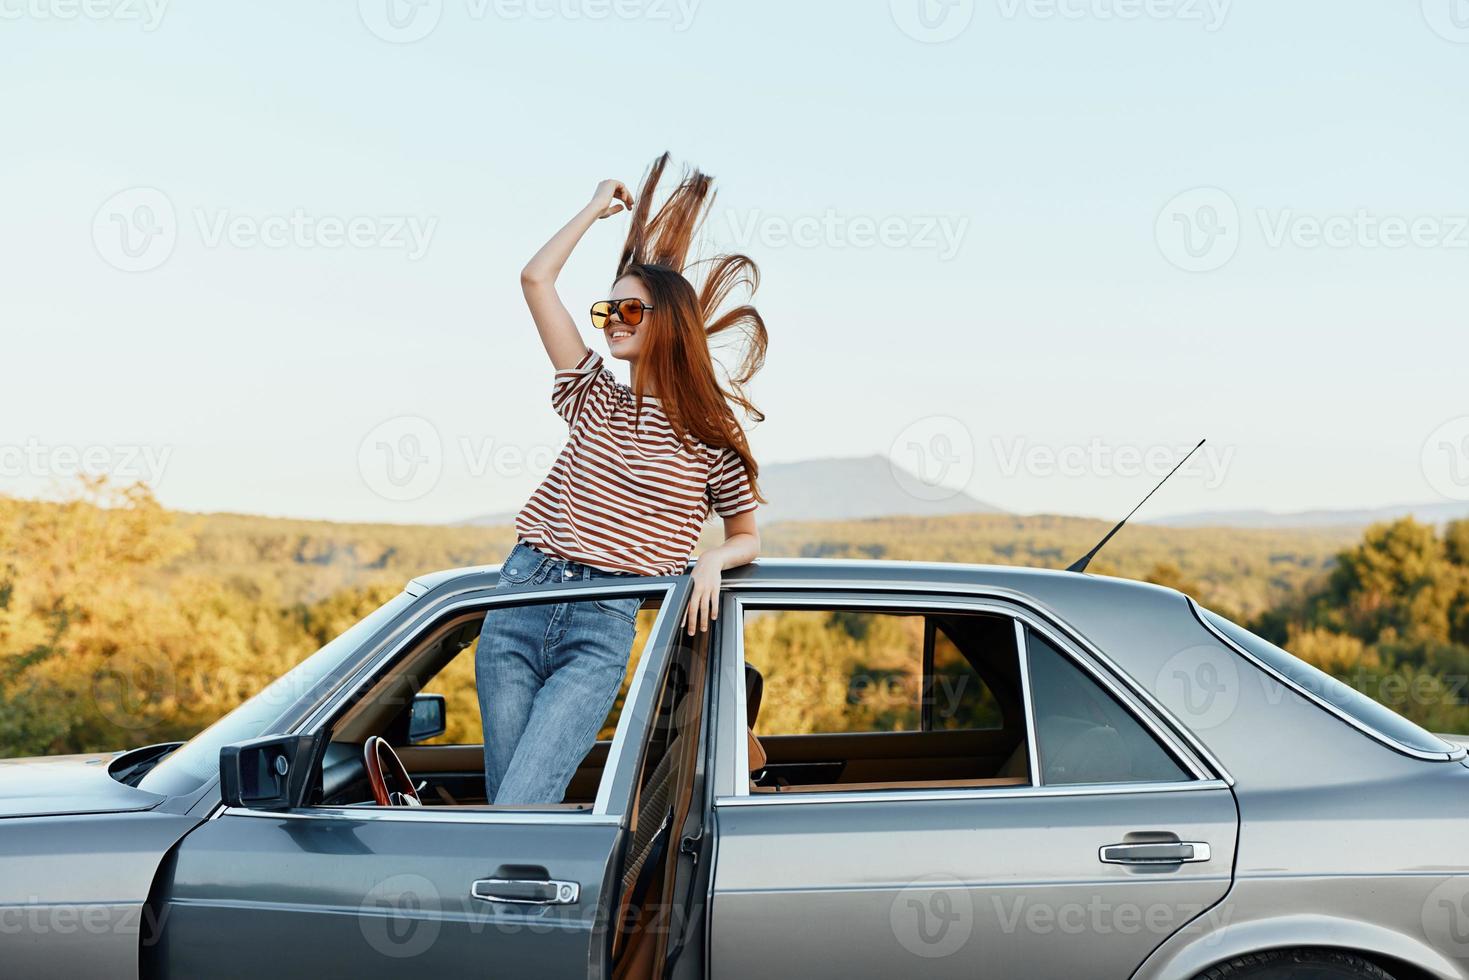 Happy woman traveler climbed on the car and spread her arms smiling happily. looks at the nature around. Lifestyle in travel and joy photo